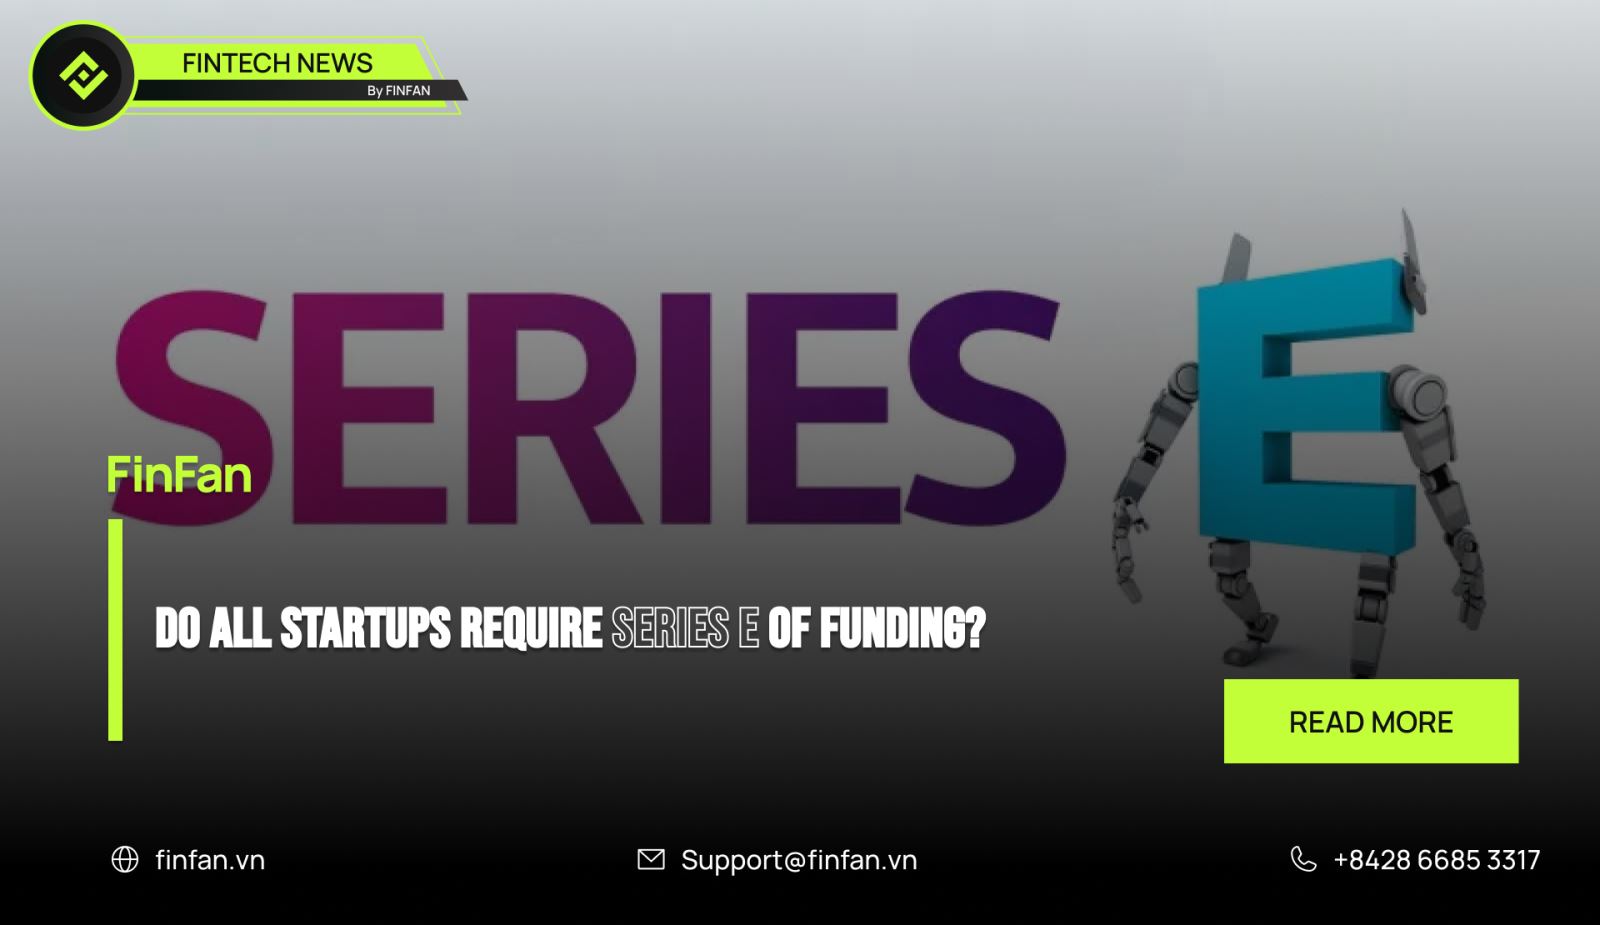 Do all startups require Series E of funding?